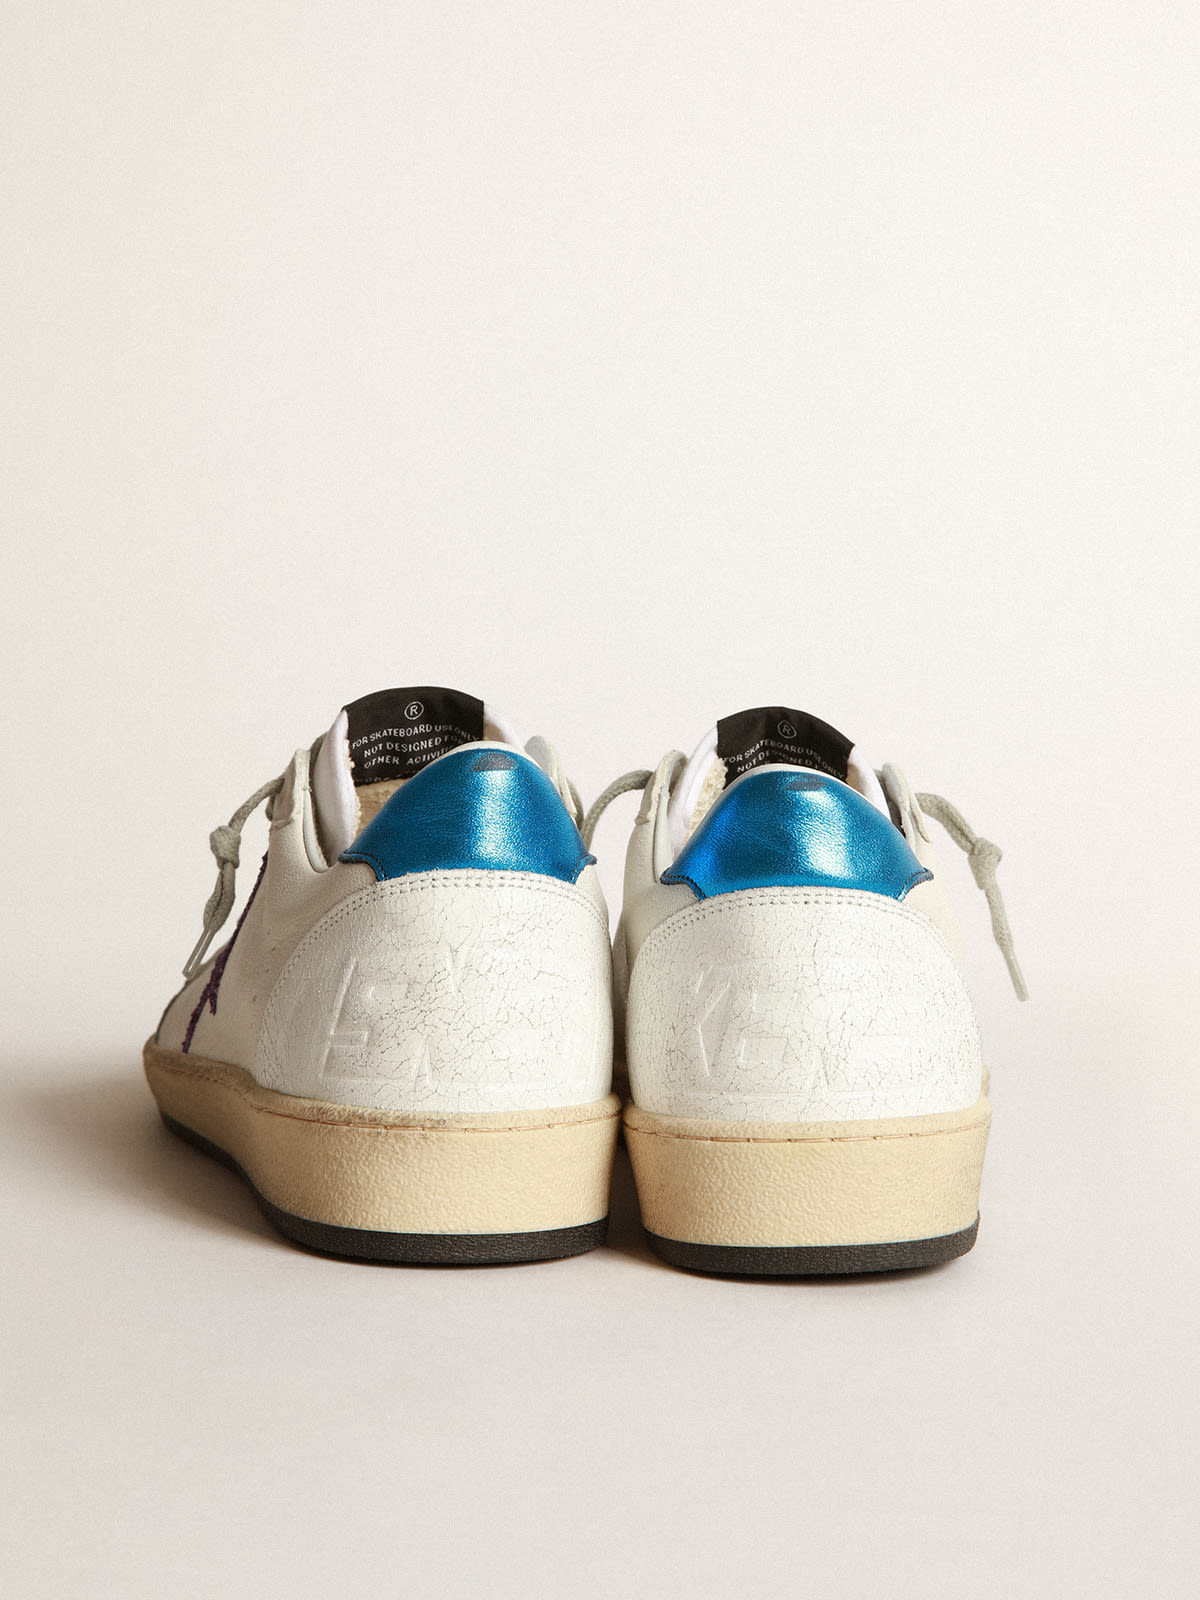 Golden Goose - Ball Star sneakers in white leather with purple glitter star   in 